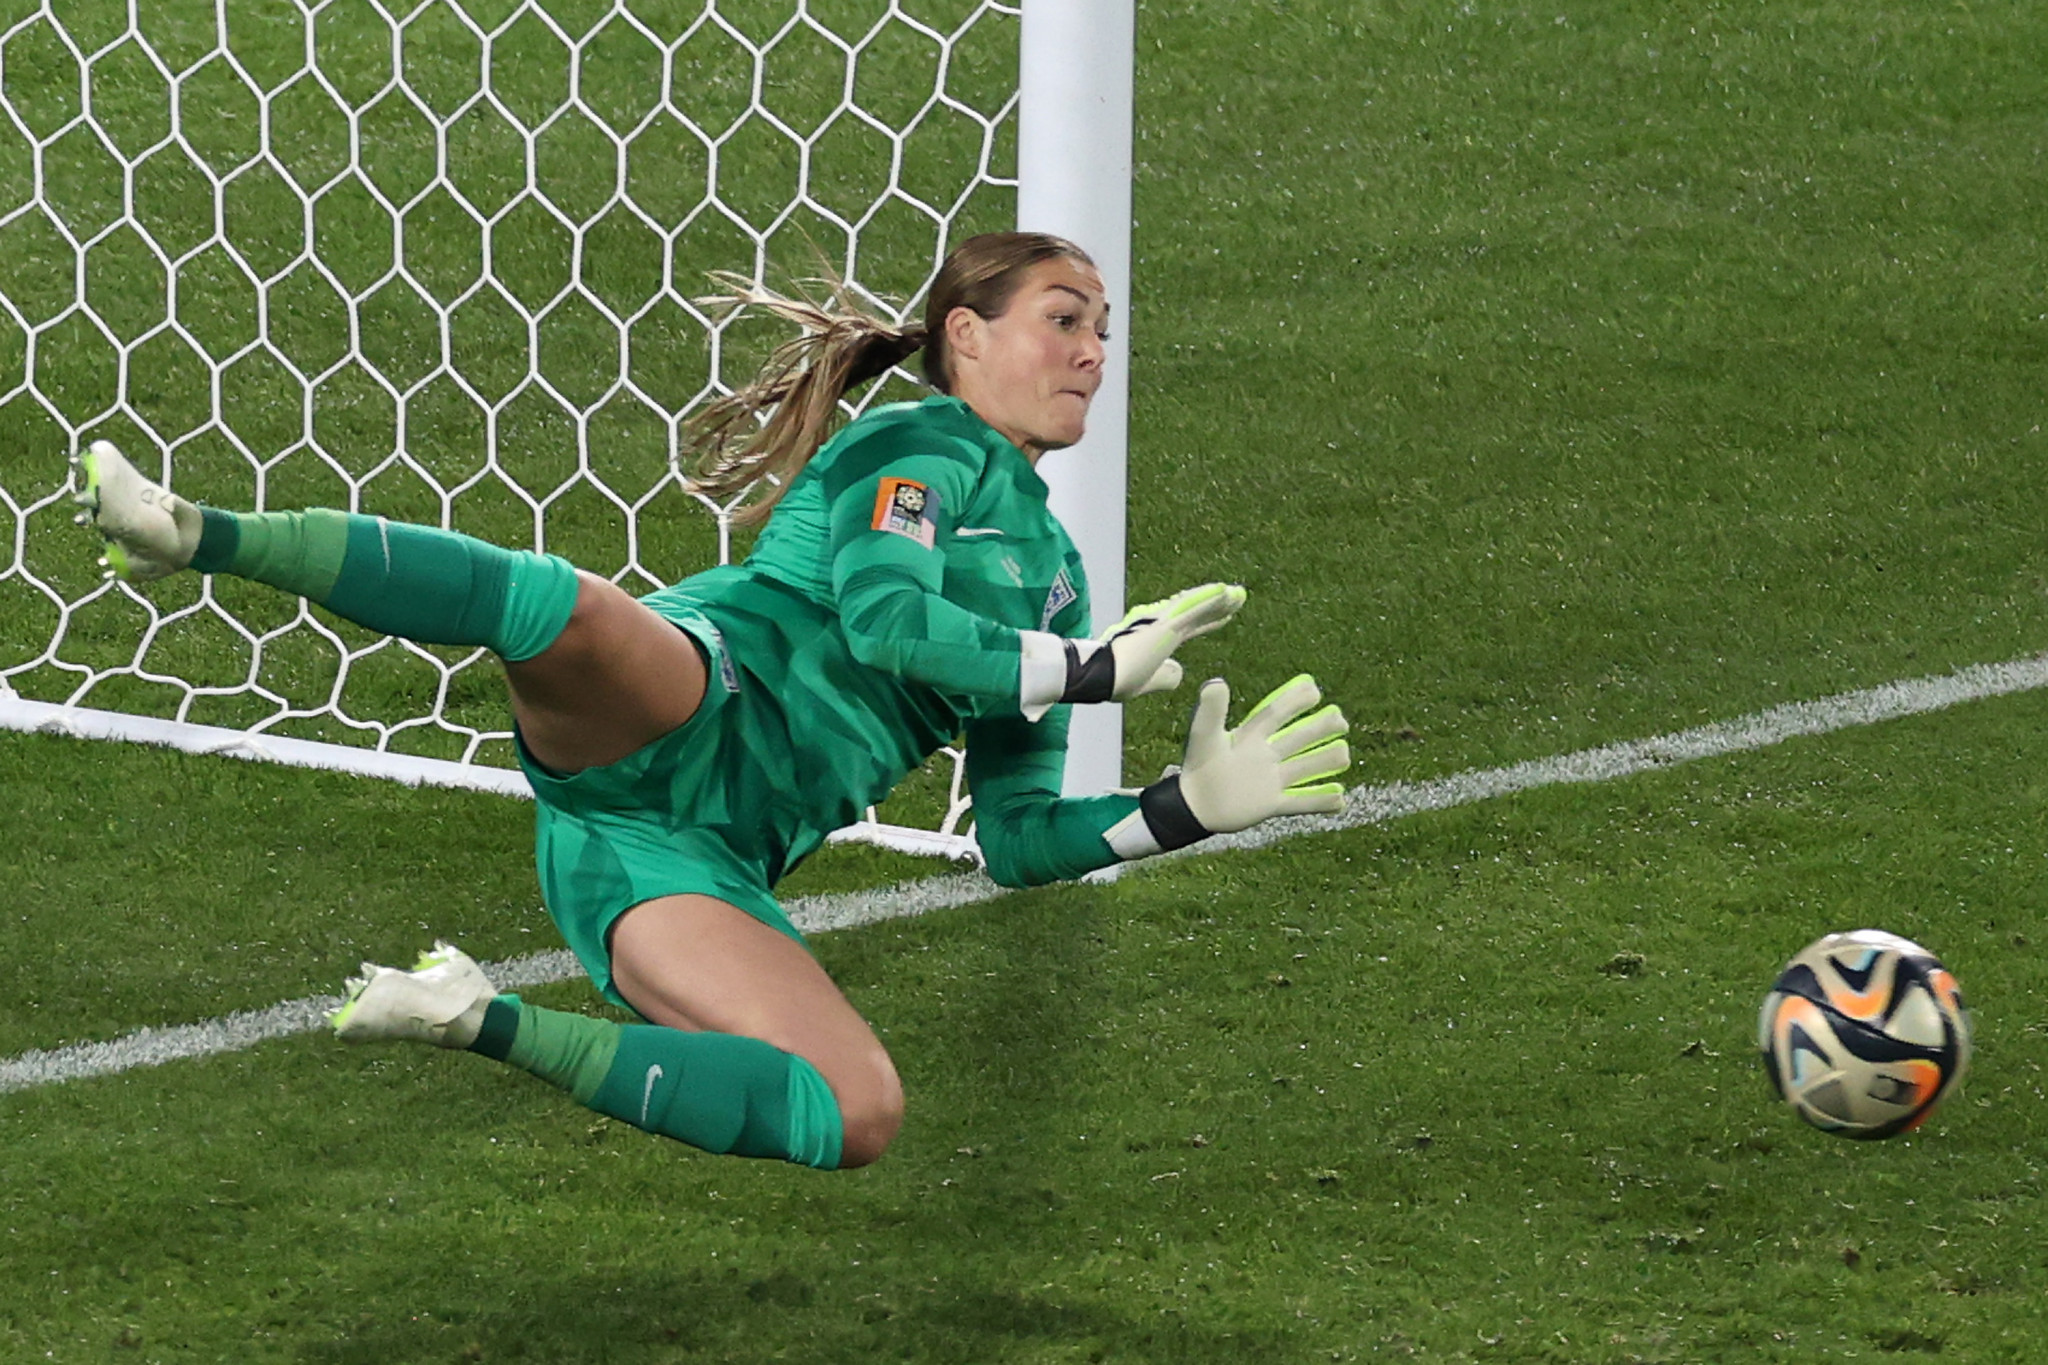 England's Mary Earps saved a second-half penalty but it was not enough to prevent defeat for the Lionesses ©Getty Images